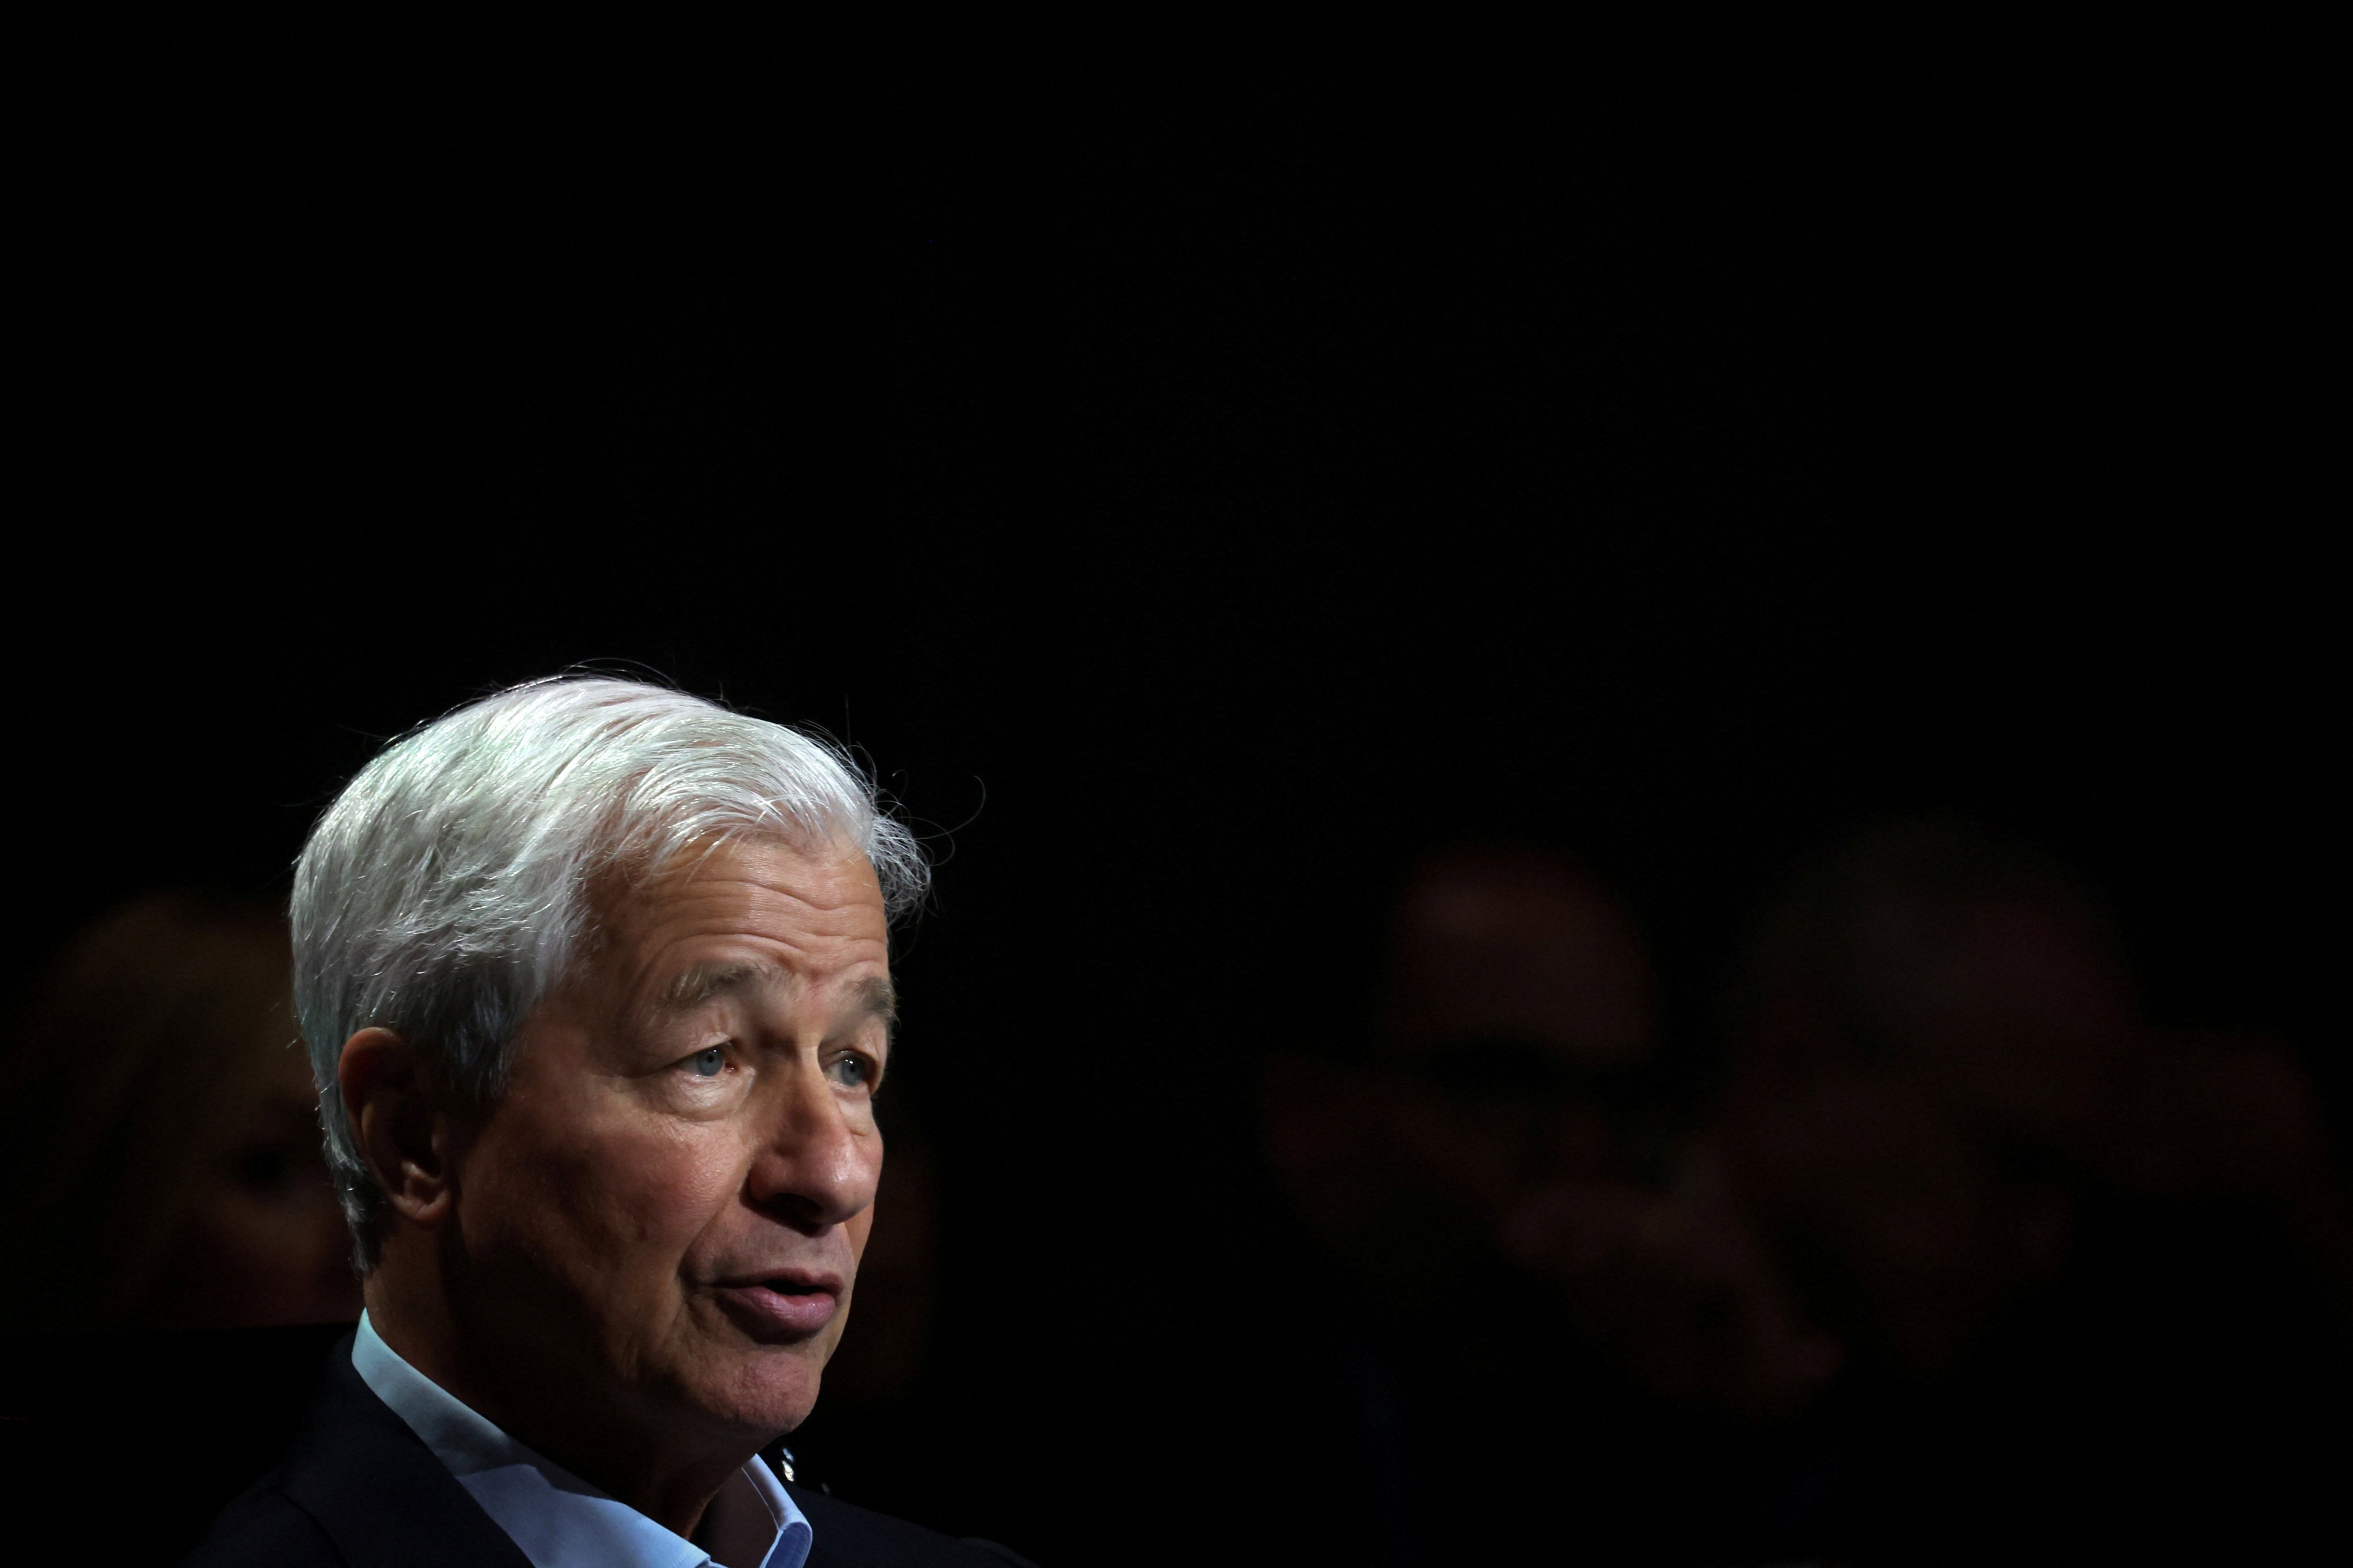 Jamie Dimon has been at the helm of JPMorgan Chase since 2006. Photo: Reuters